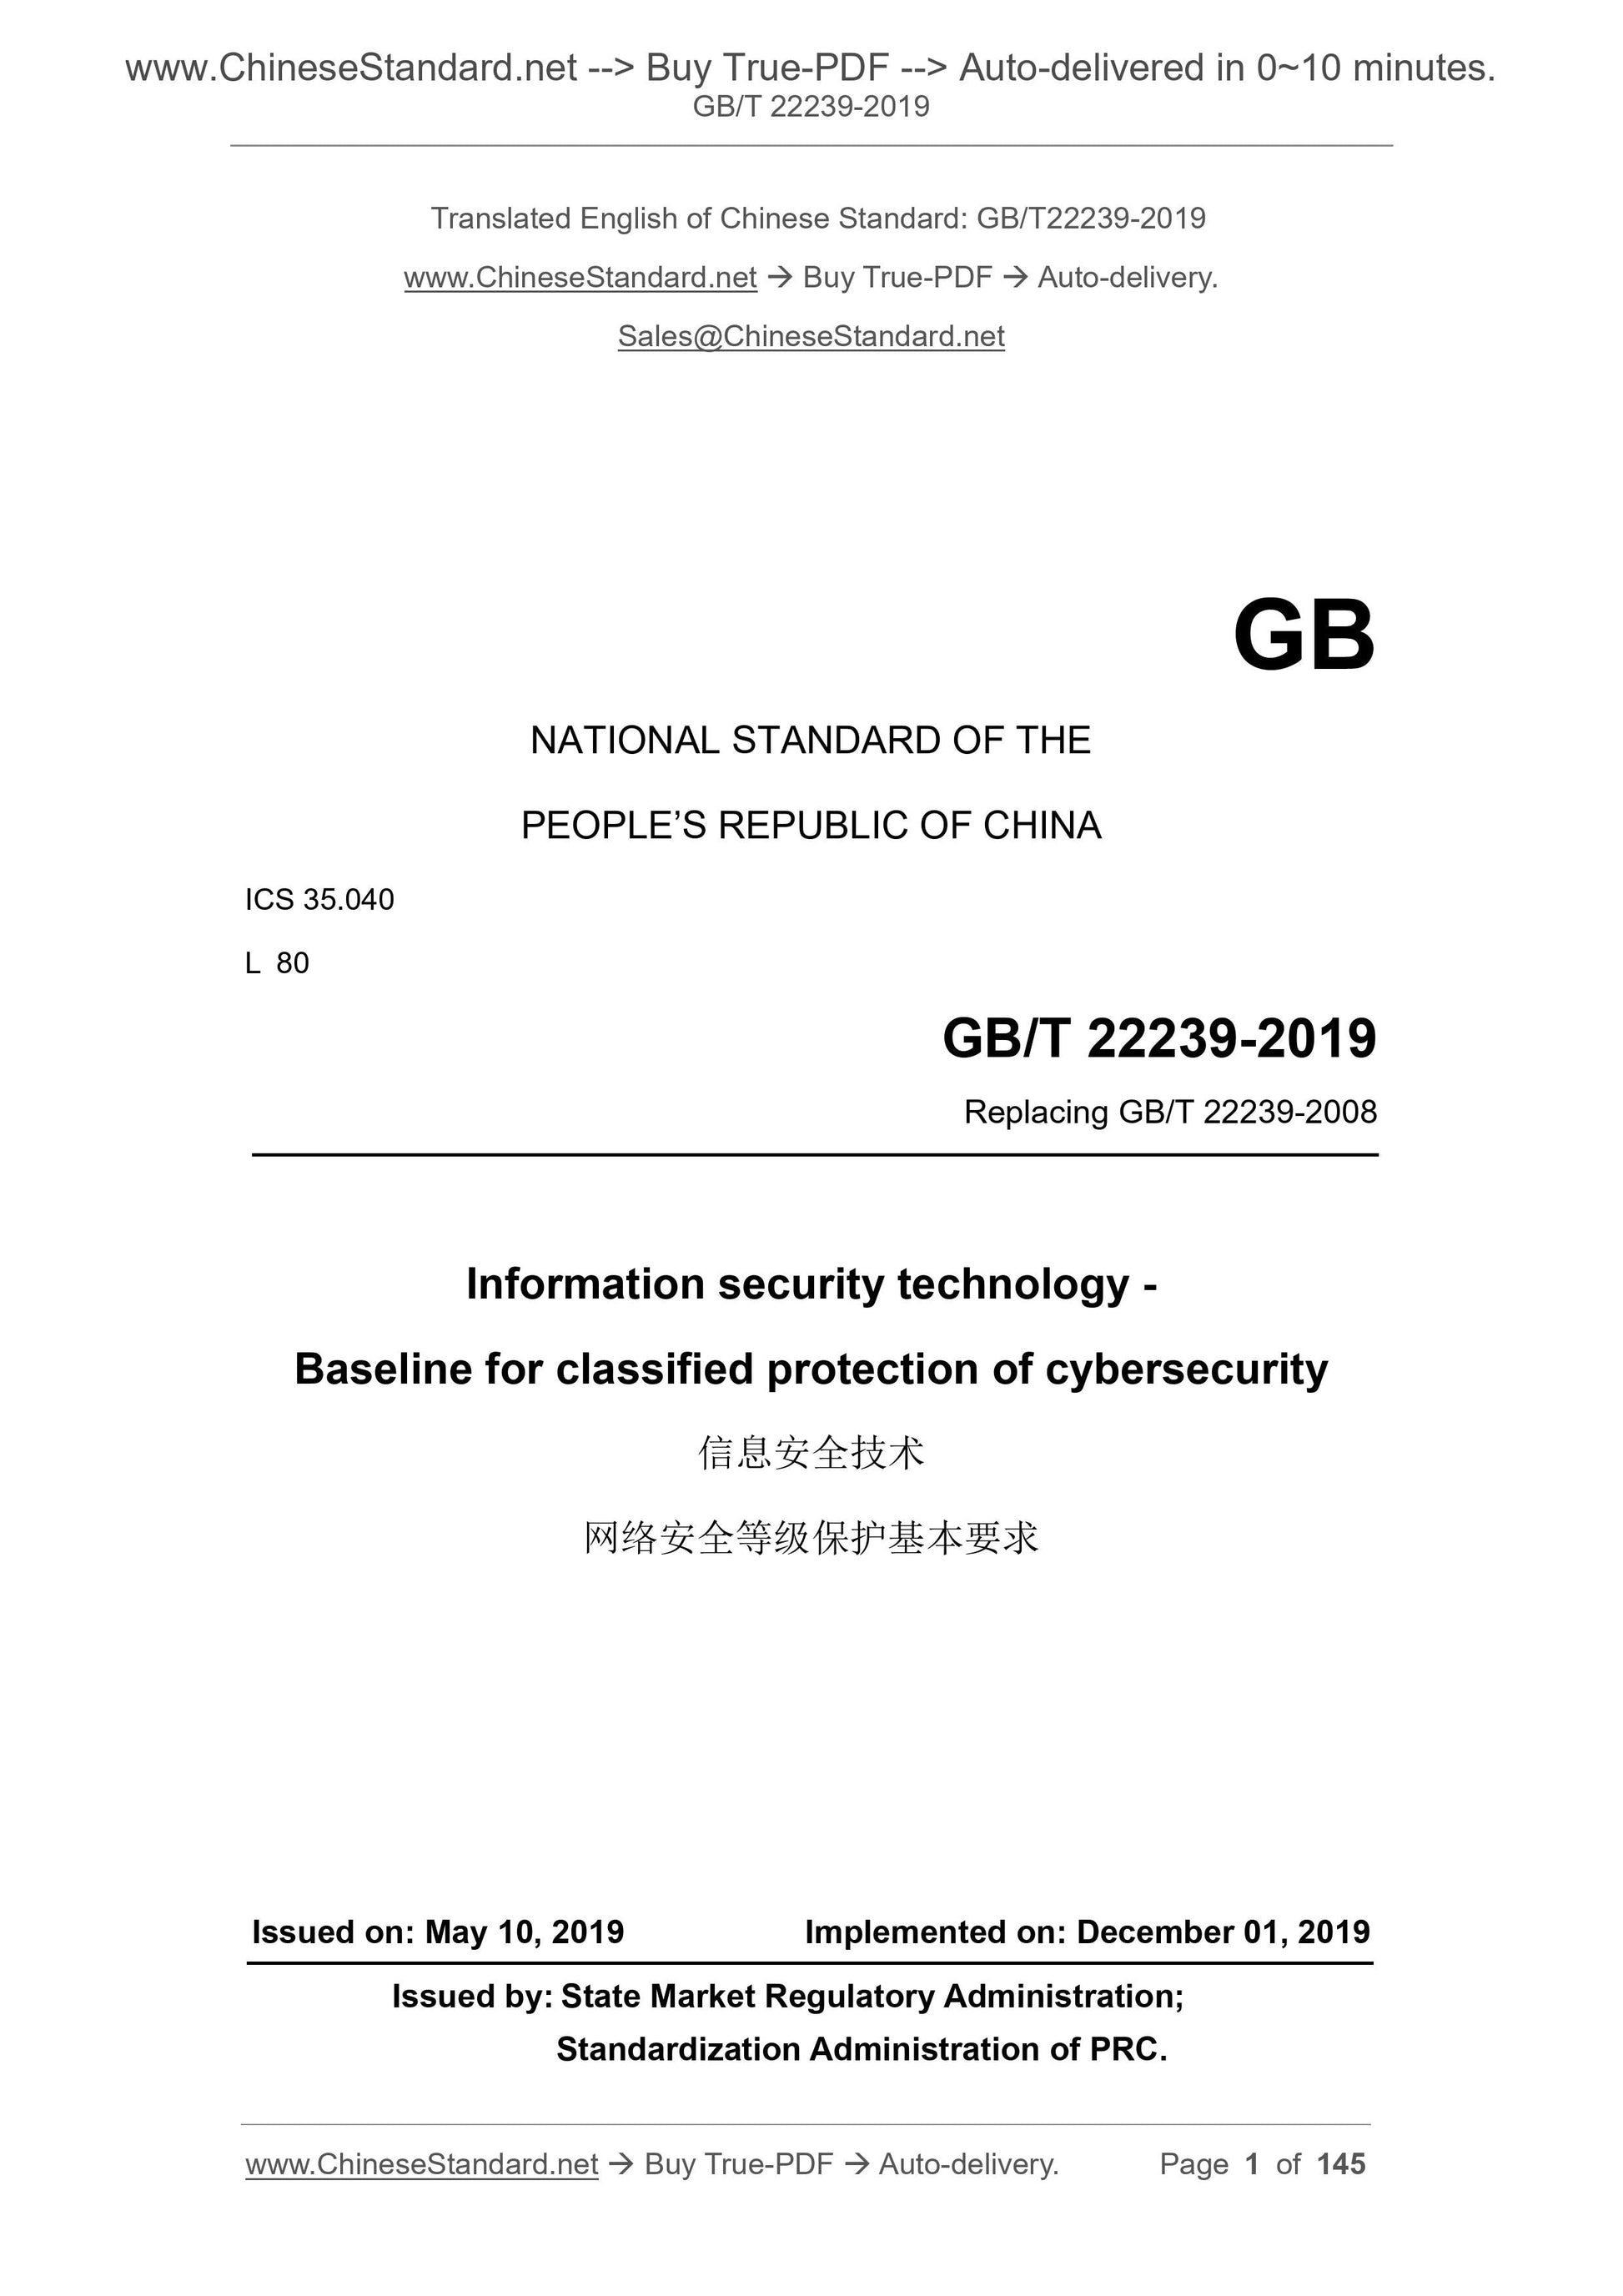 GB/T 22239-2019 Page 1